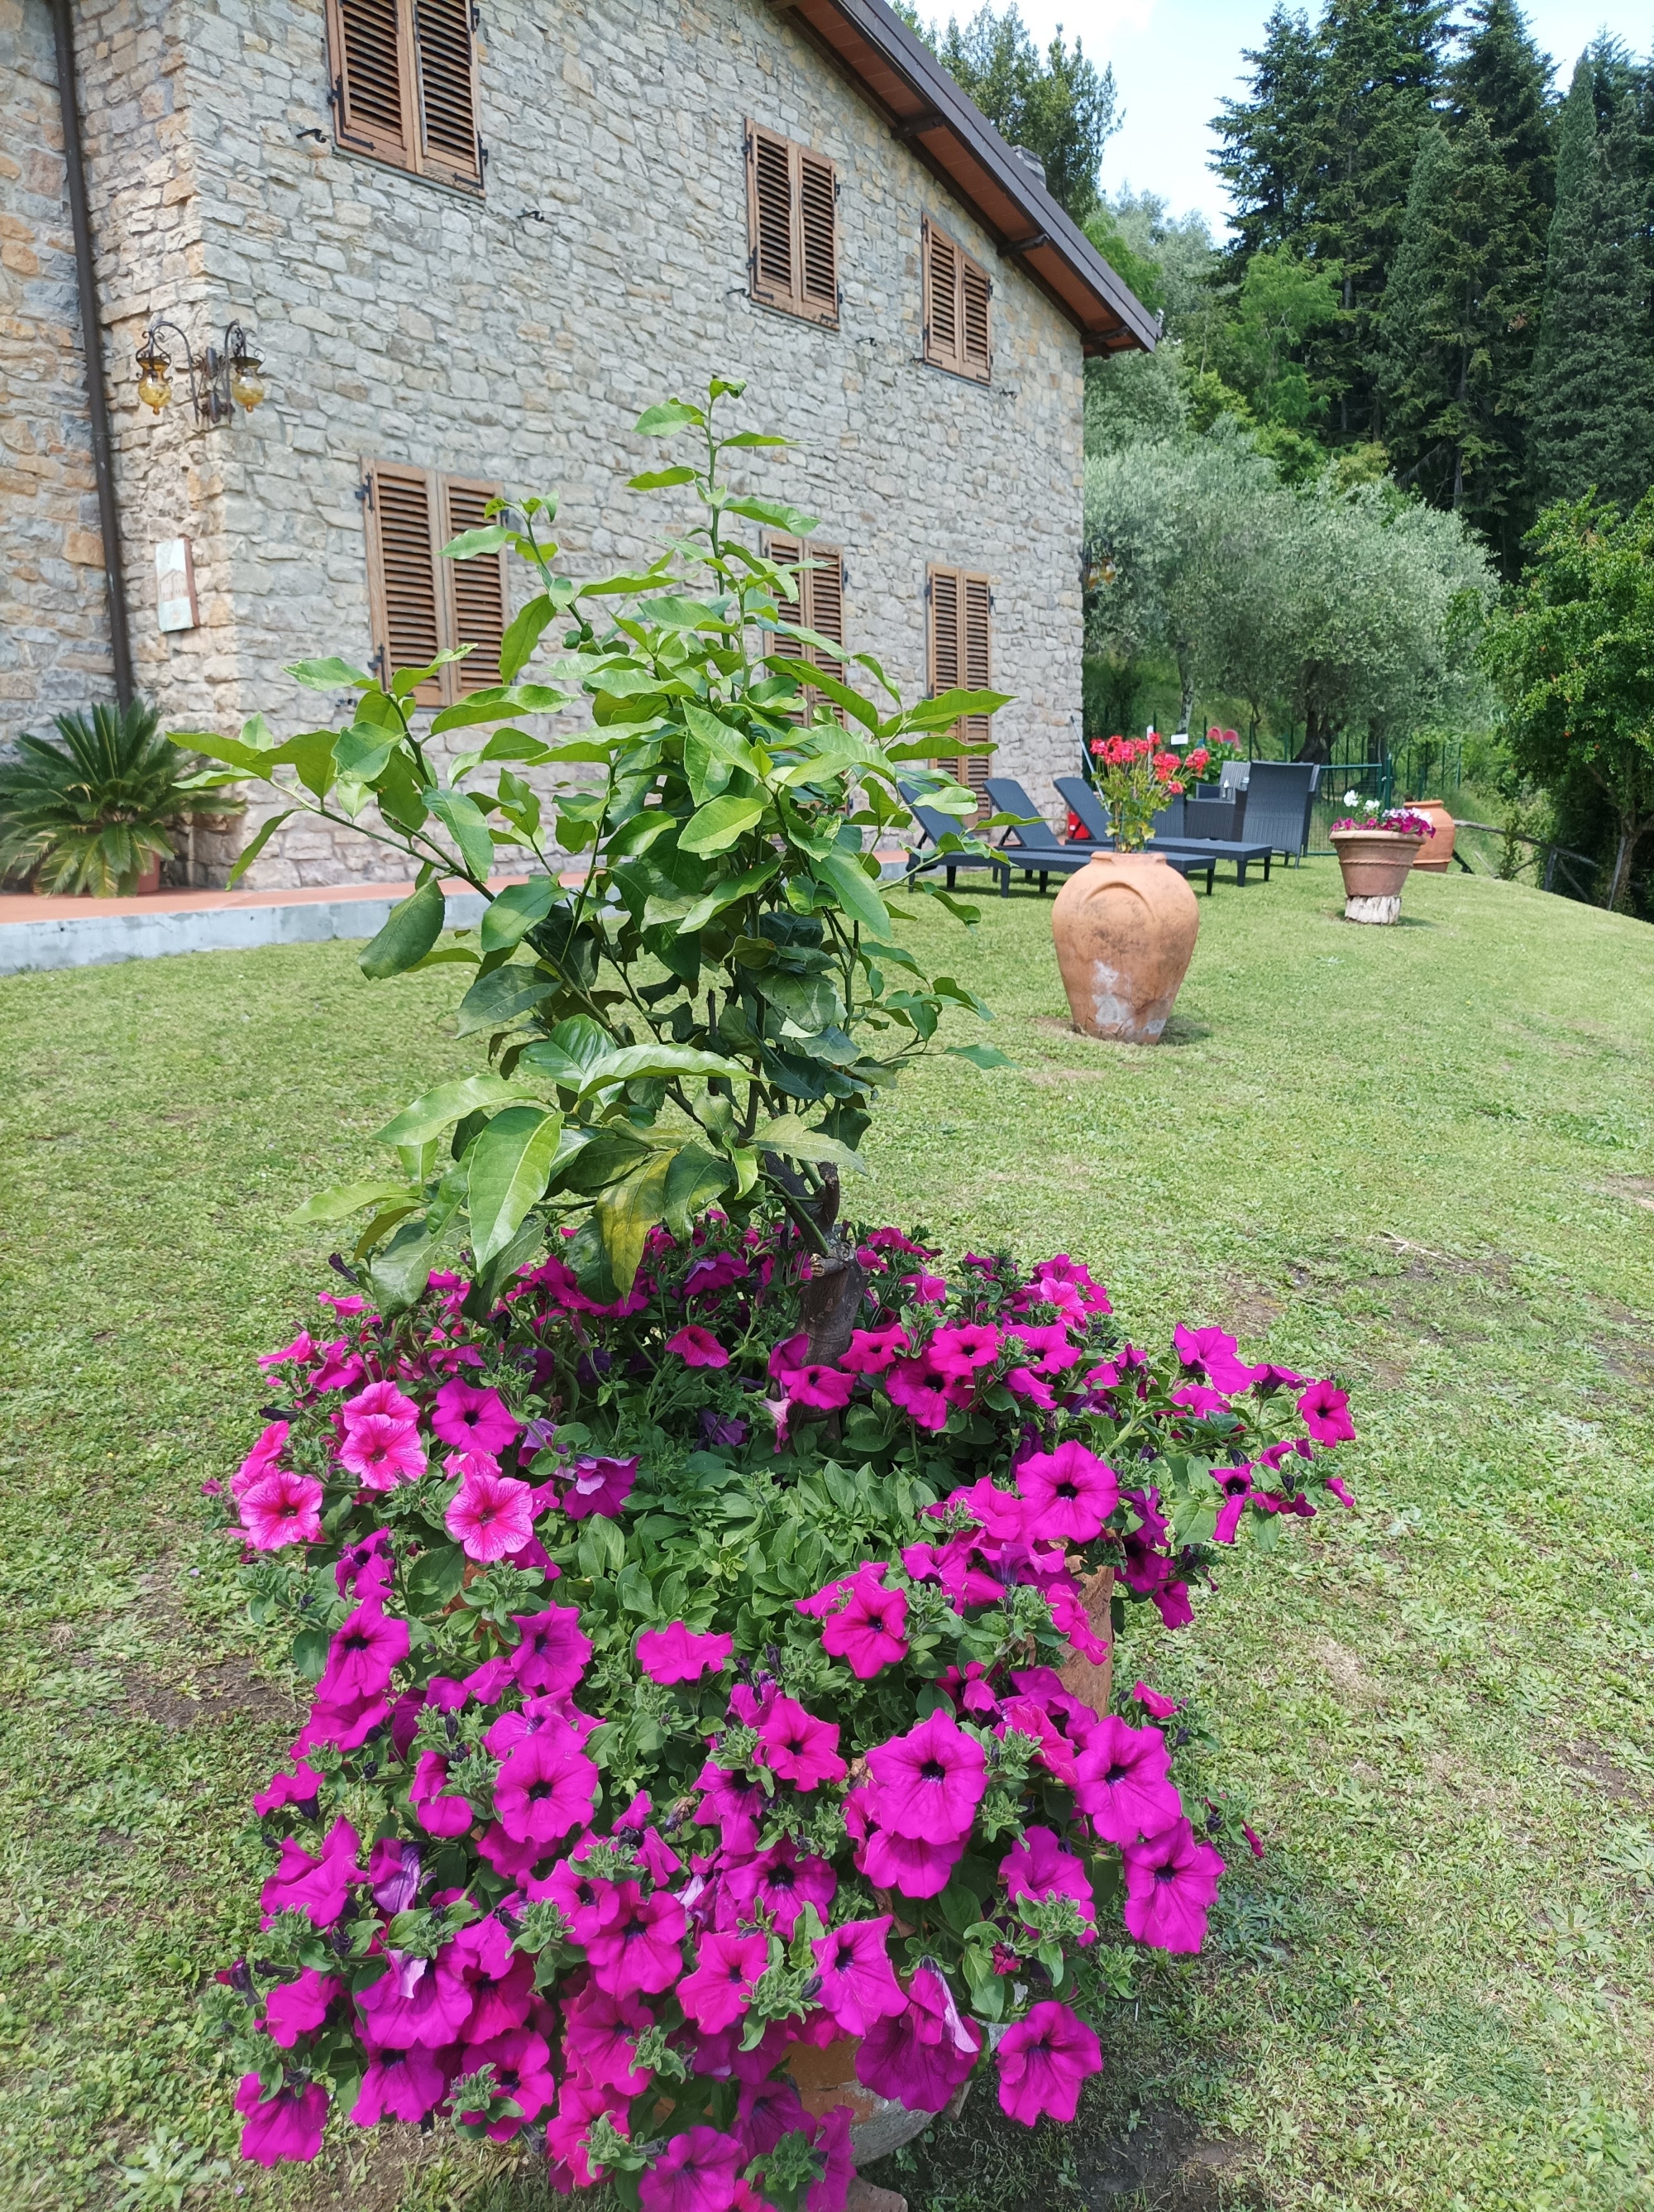 One week stay in Pescia between September and October